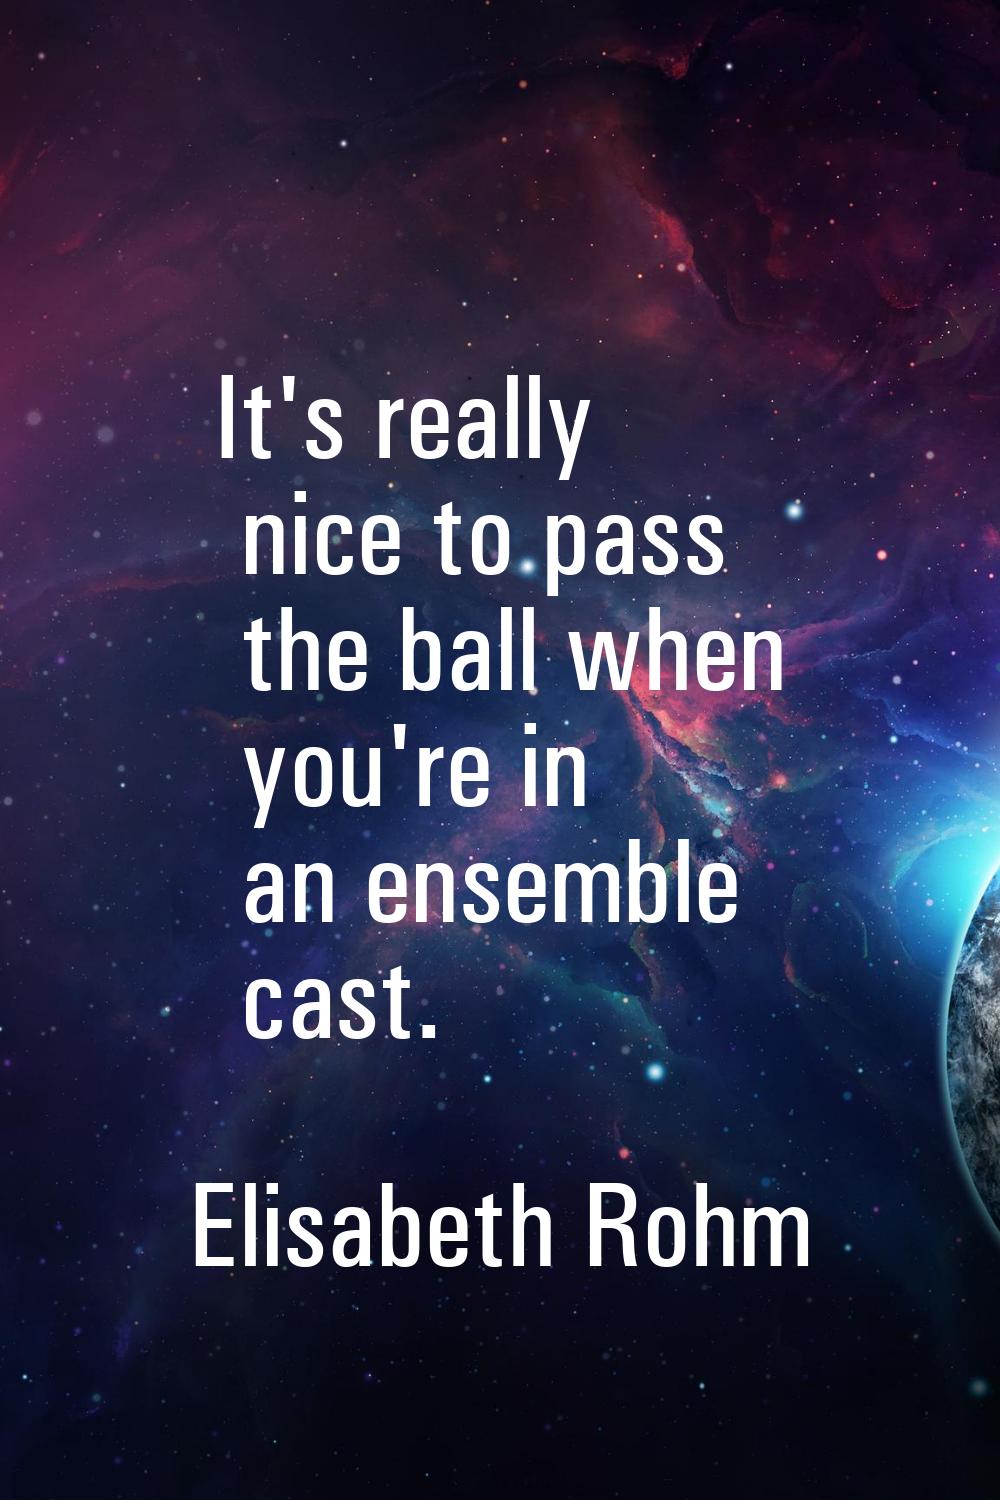 It's really nice to pass the ball when you're in an ensemble cast.